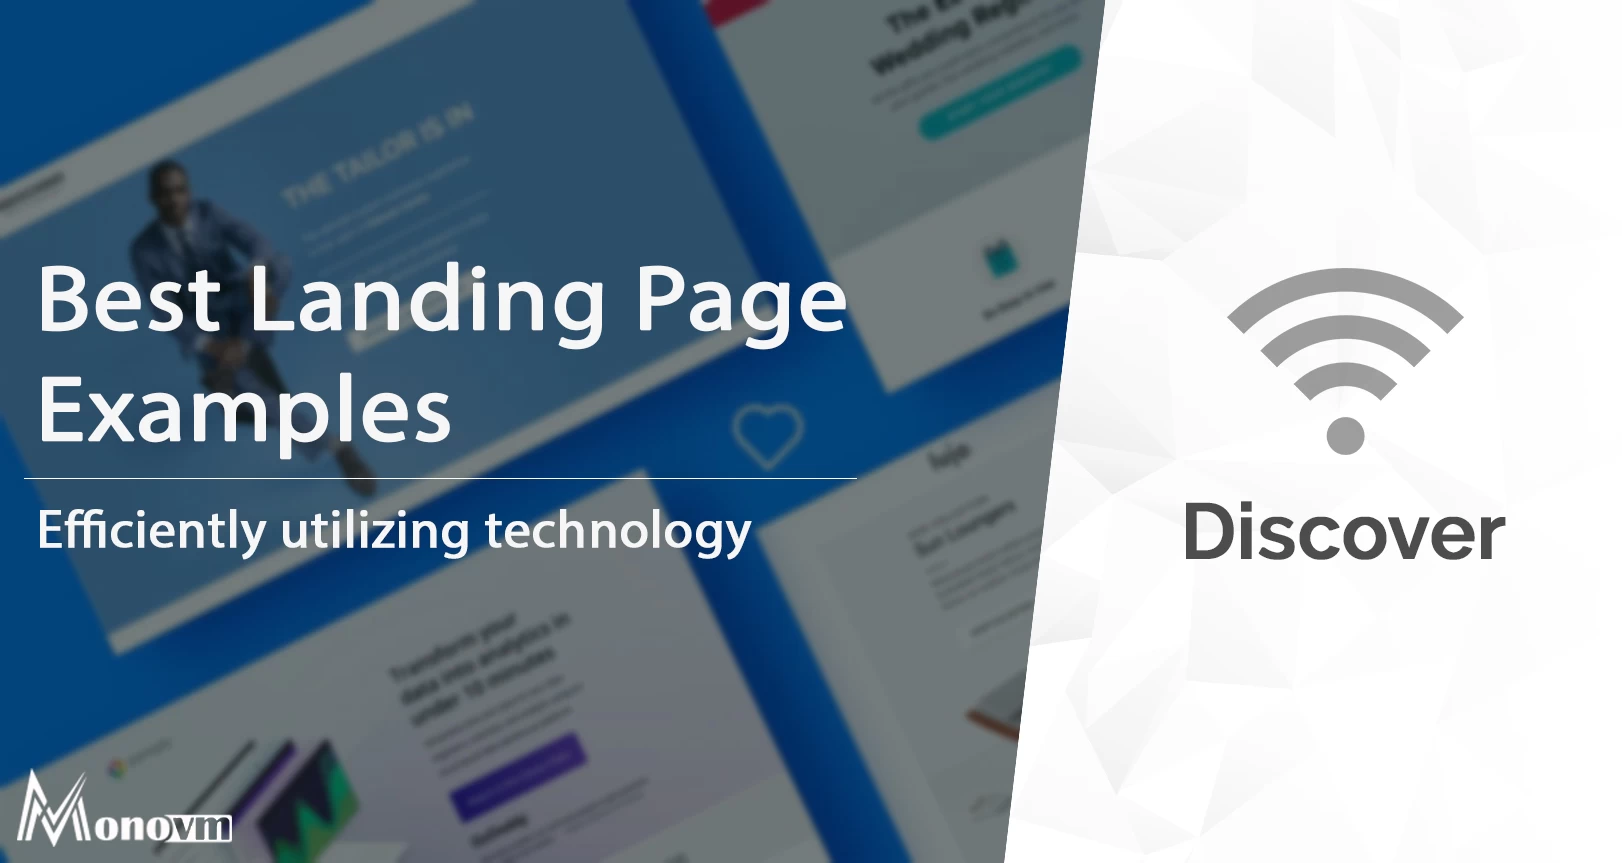 Landing Pages examples: best on the internet